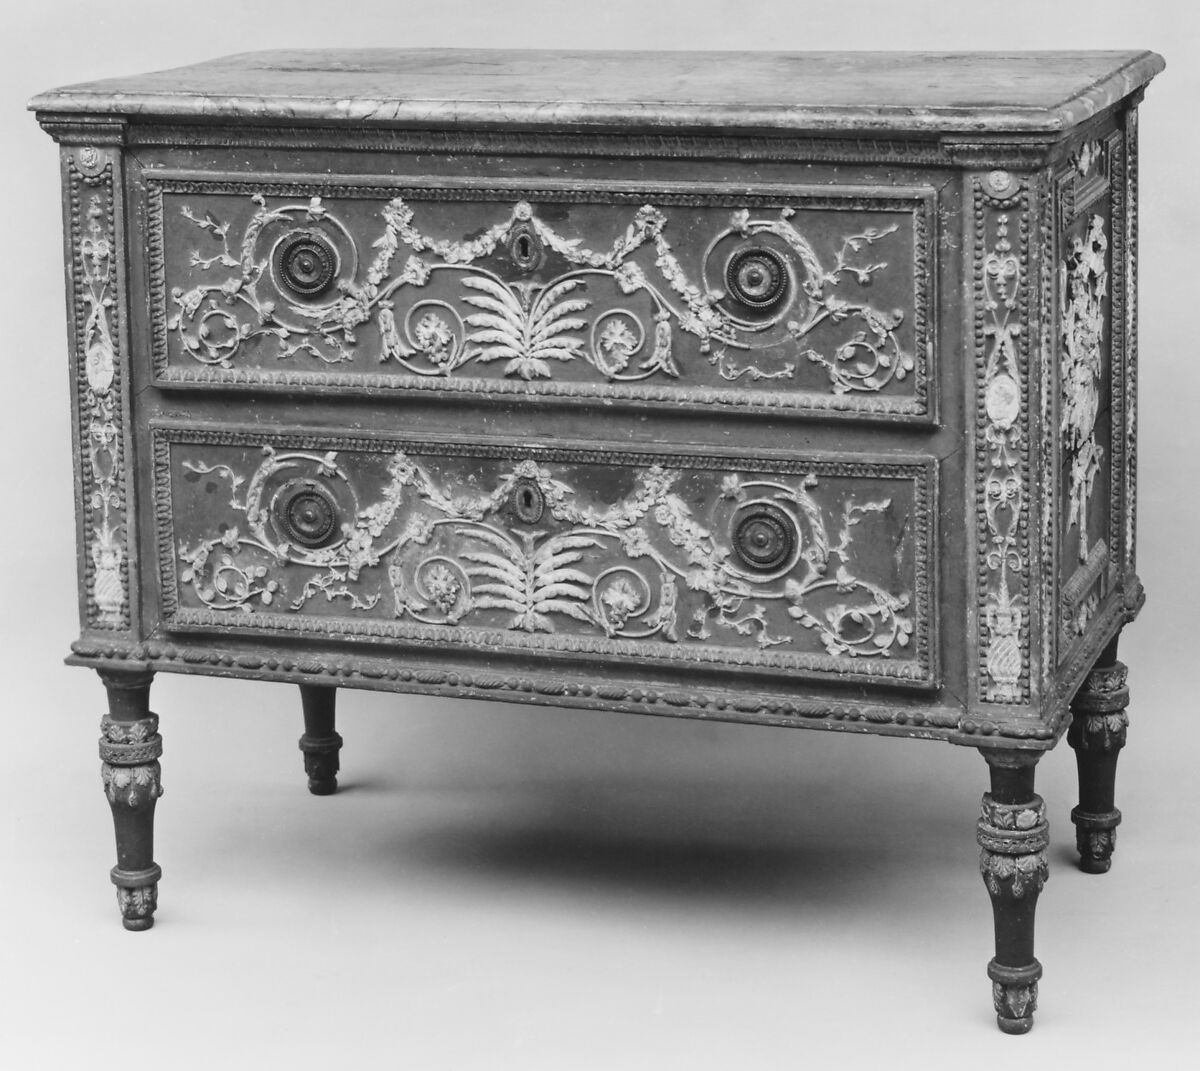 Commode, Painted poplar, gesso, brass, with imitation marble top, Italian, Piedmont, possibly Turin 